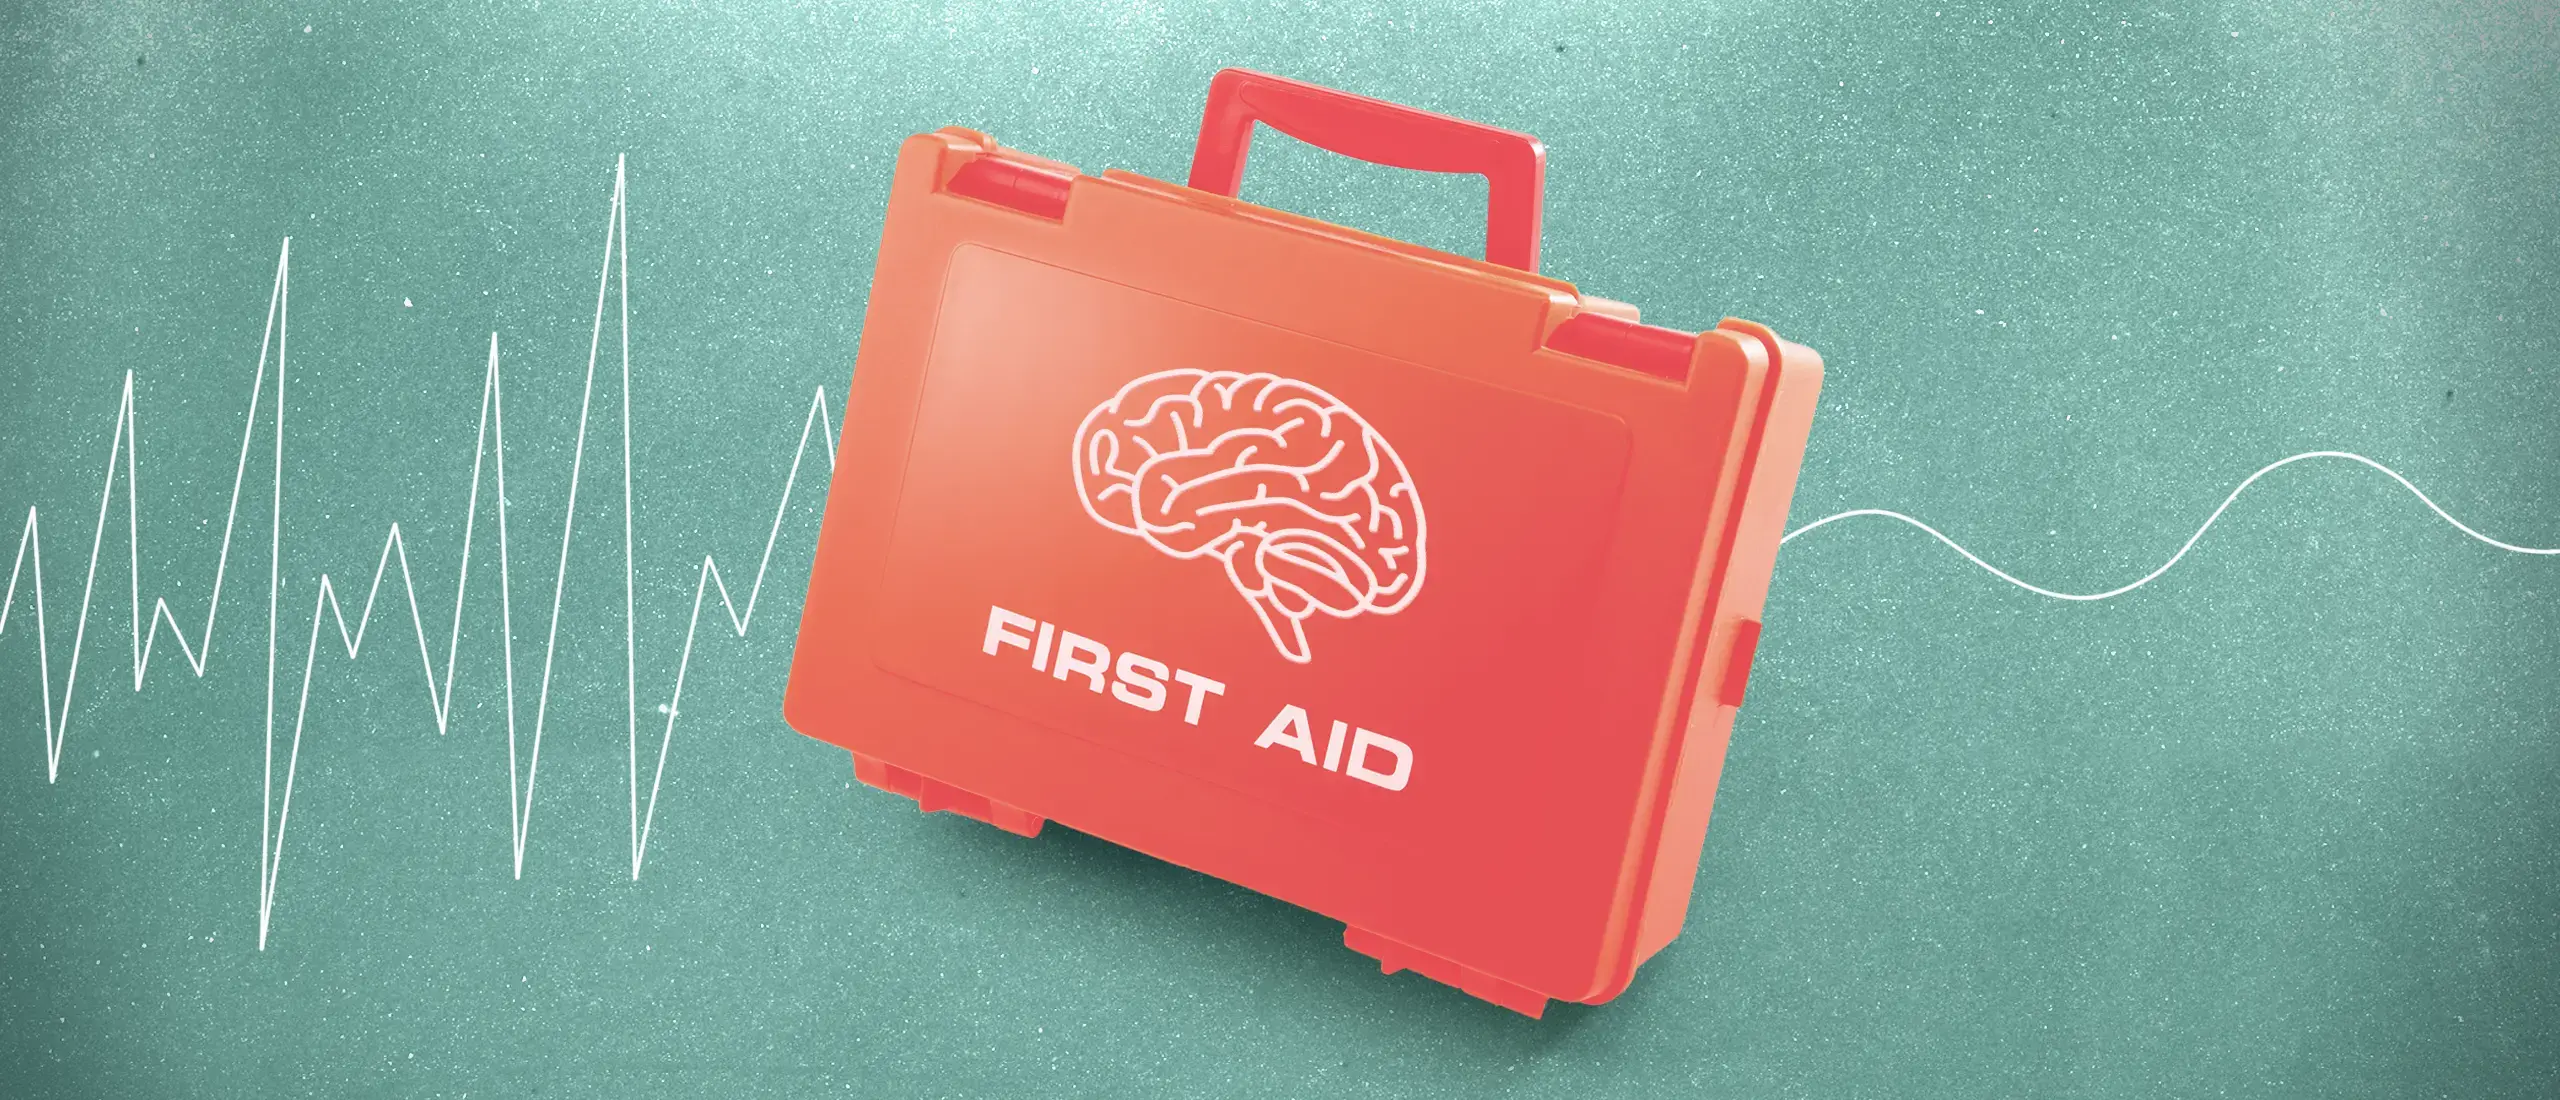 4 Tools You Need in Your Emotional First Aid Kit, According to Psychologist Guy Winch